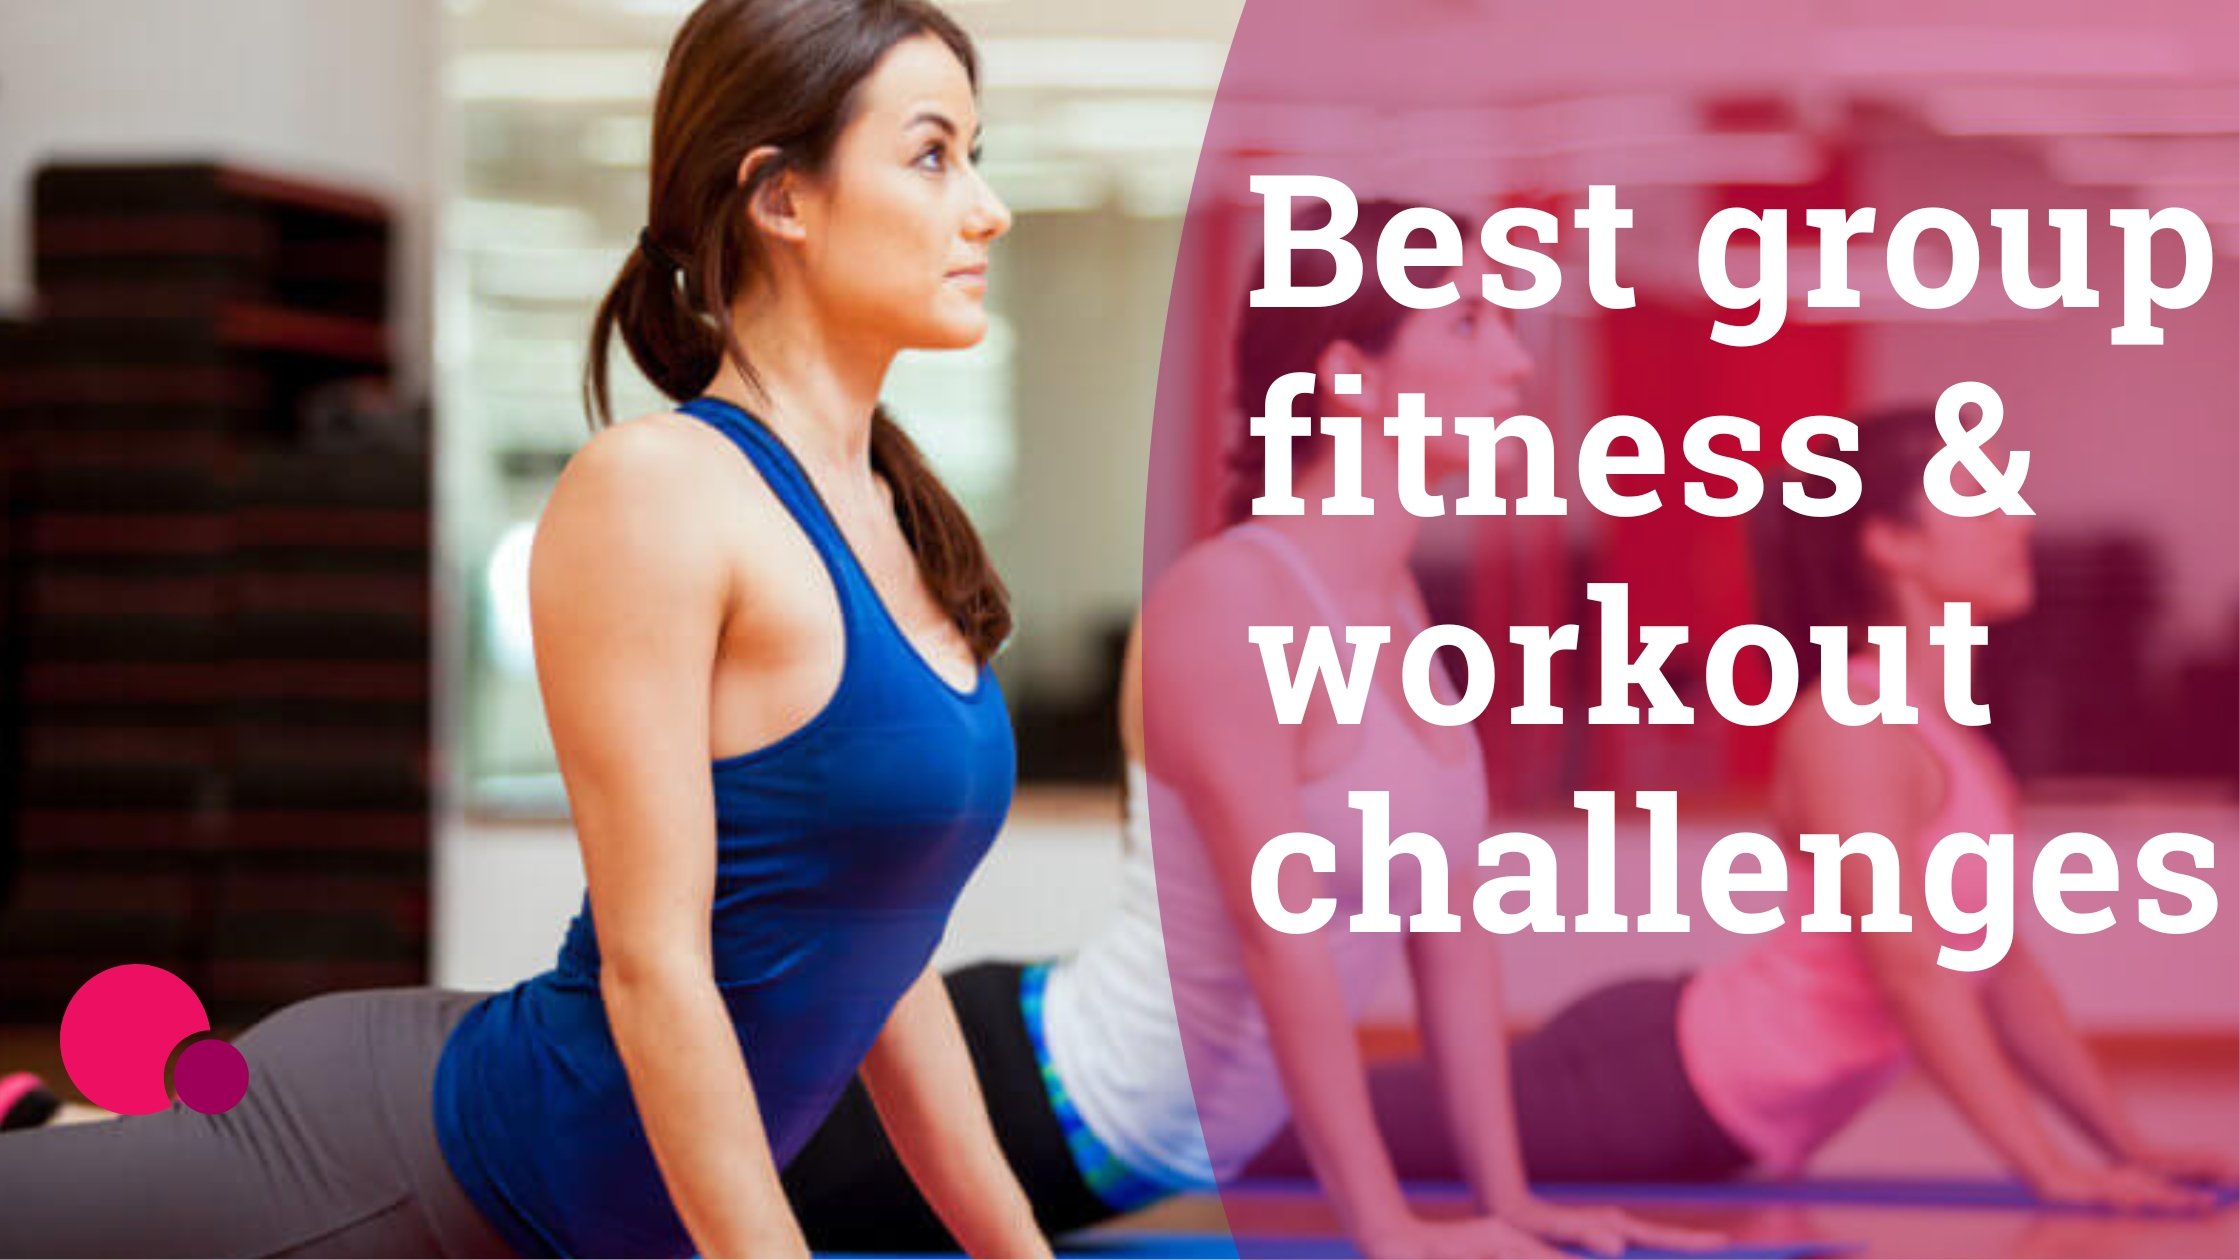 Best group fitness & workout challenges.